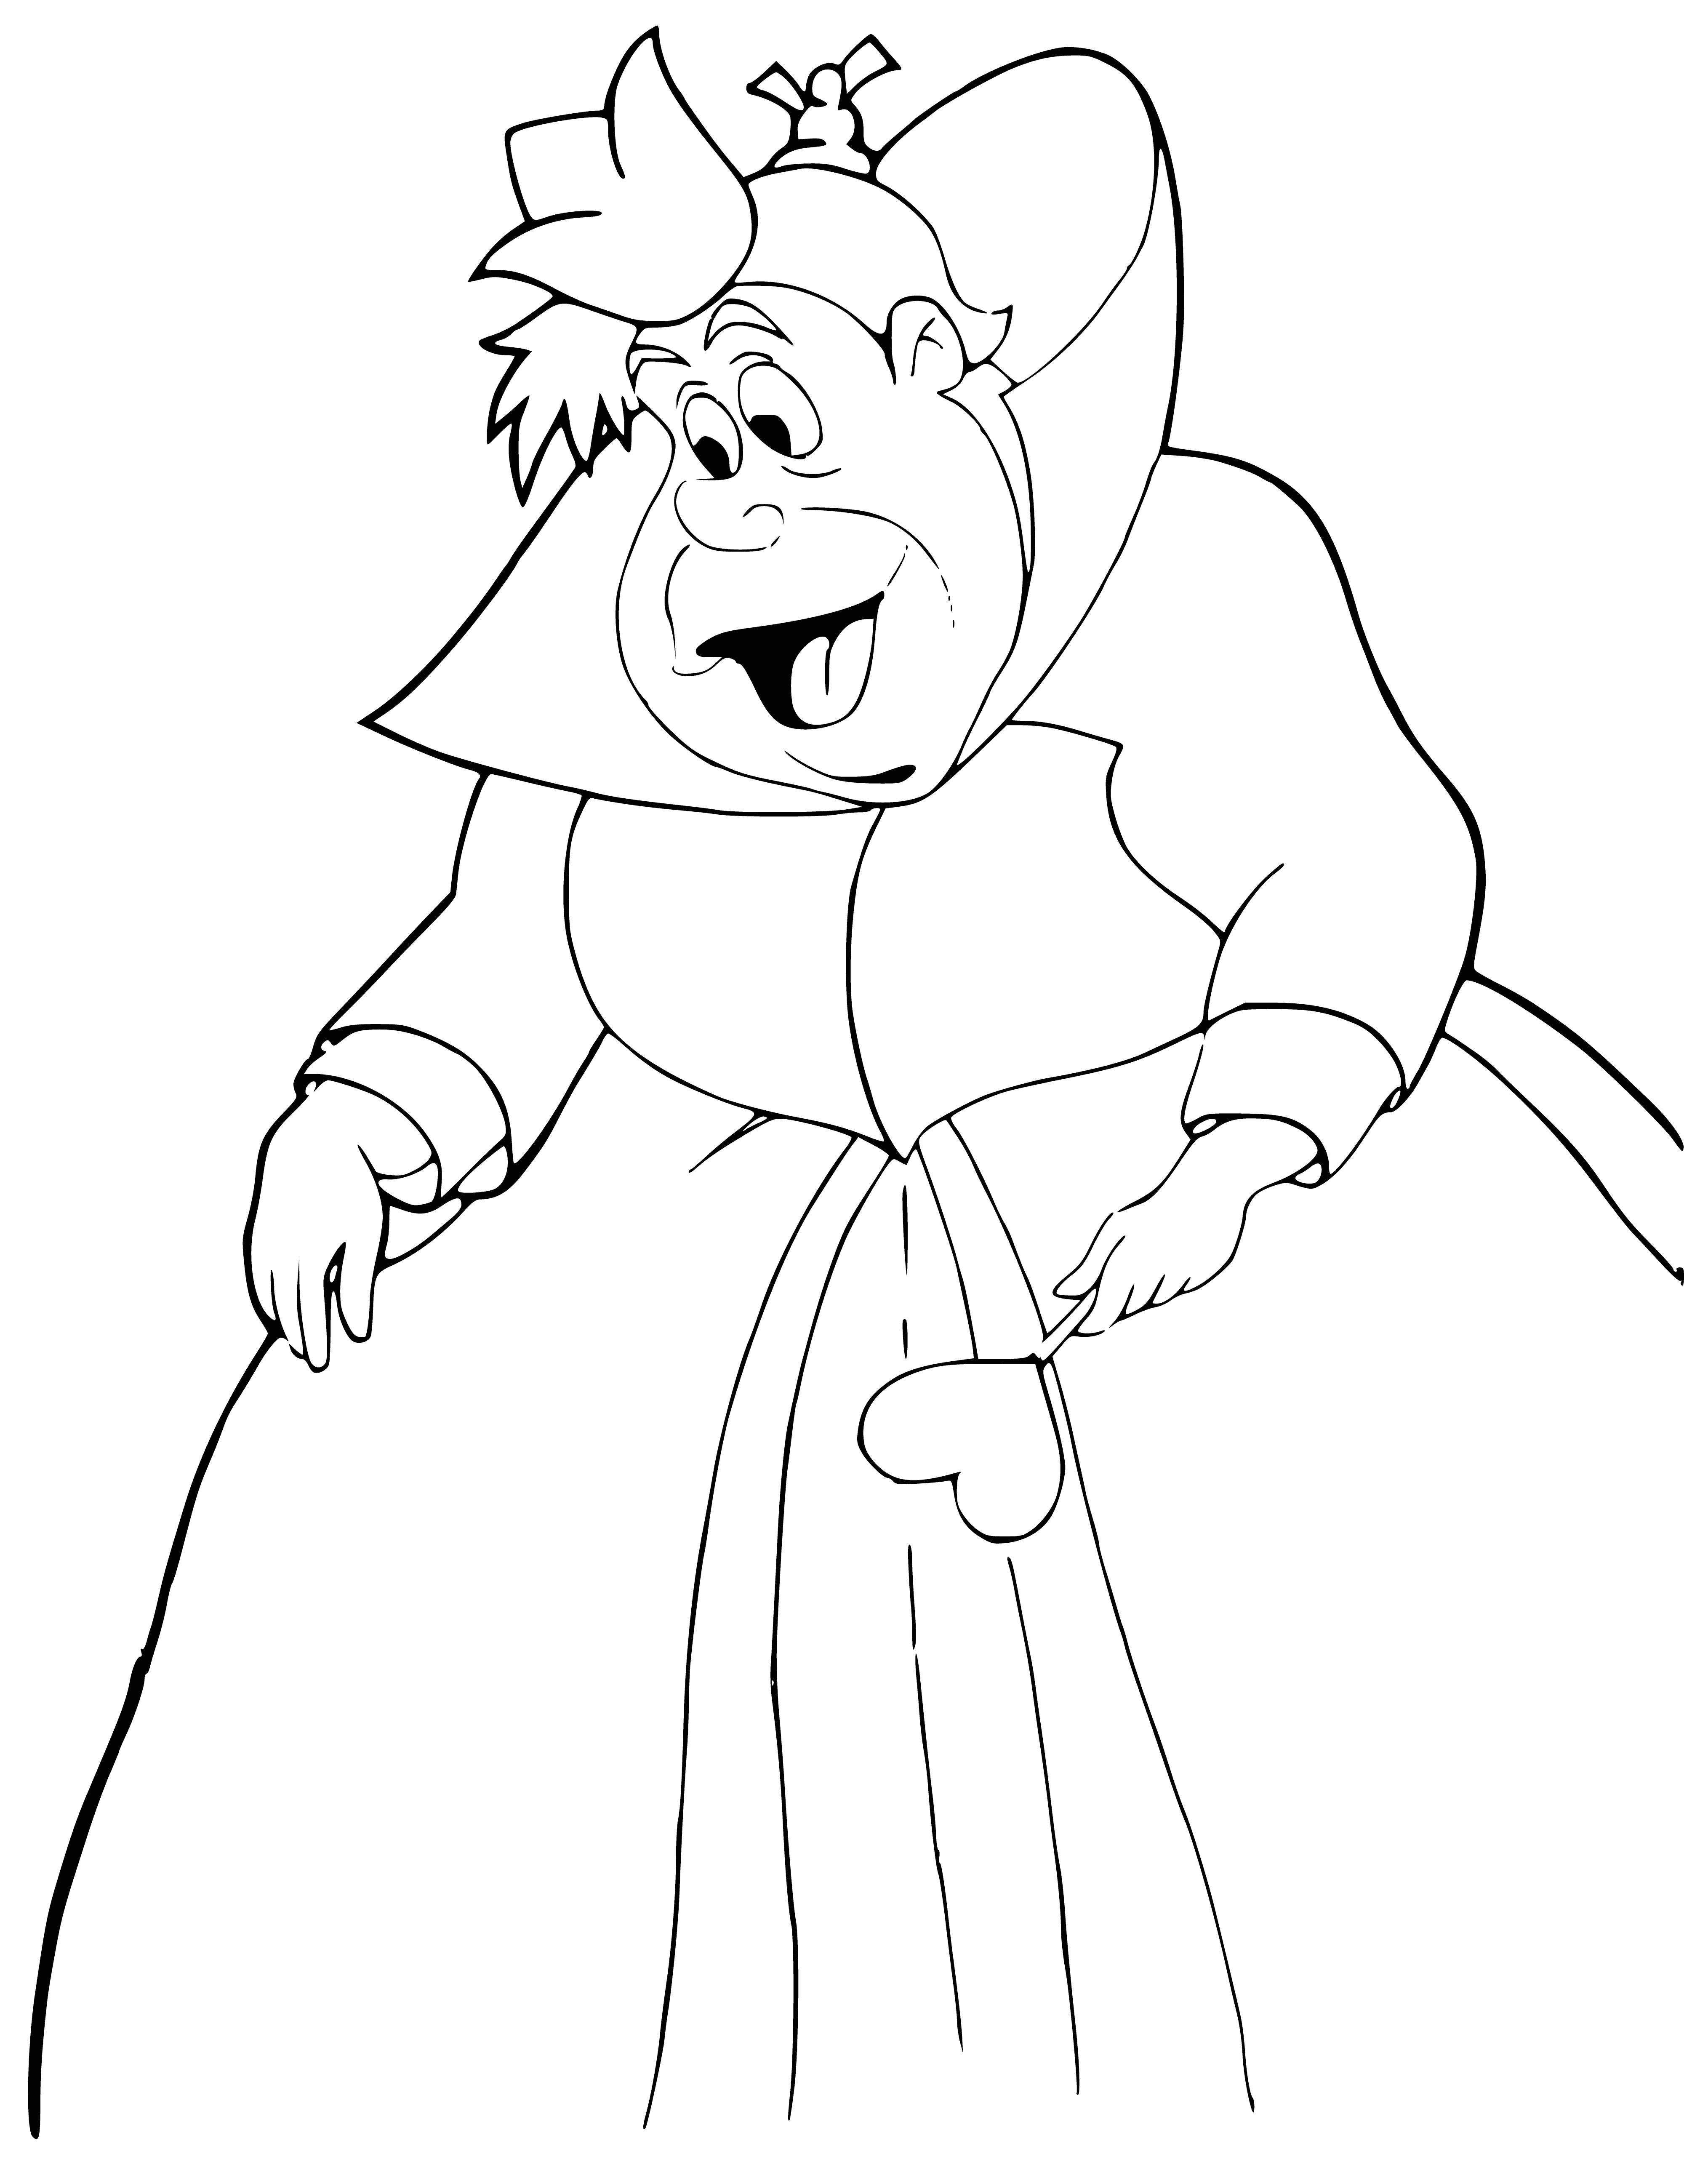 Queen coloring page